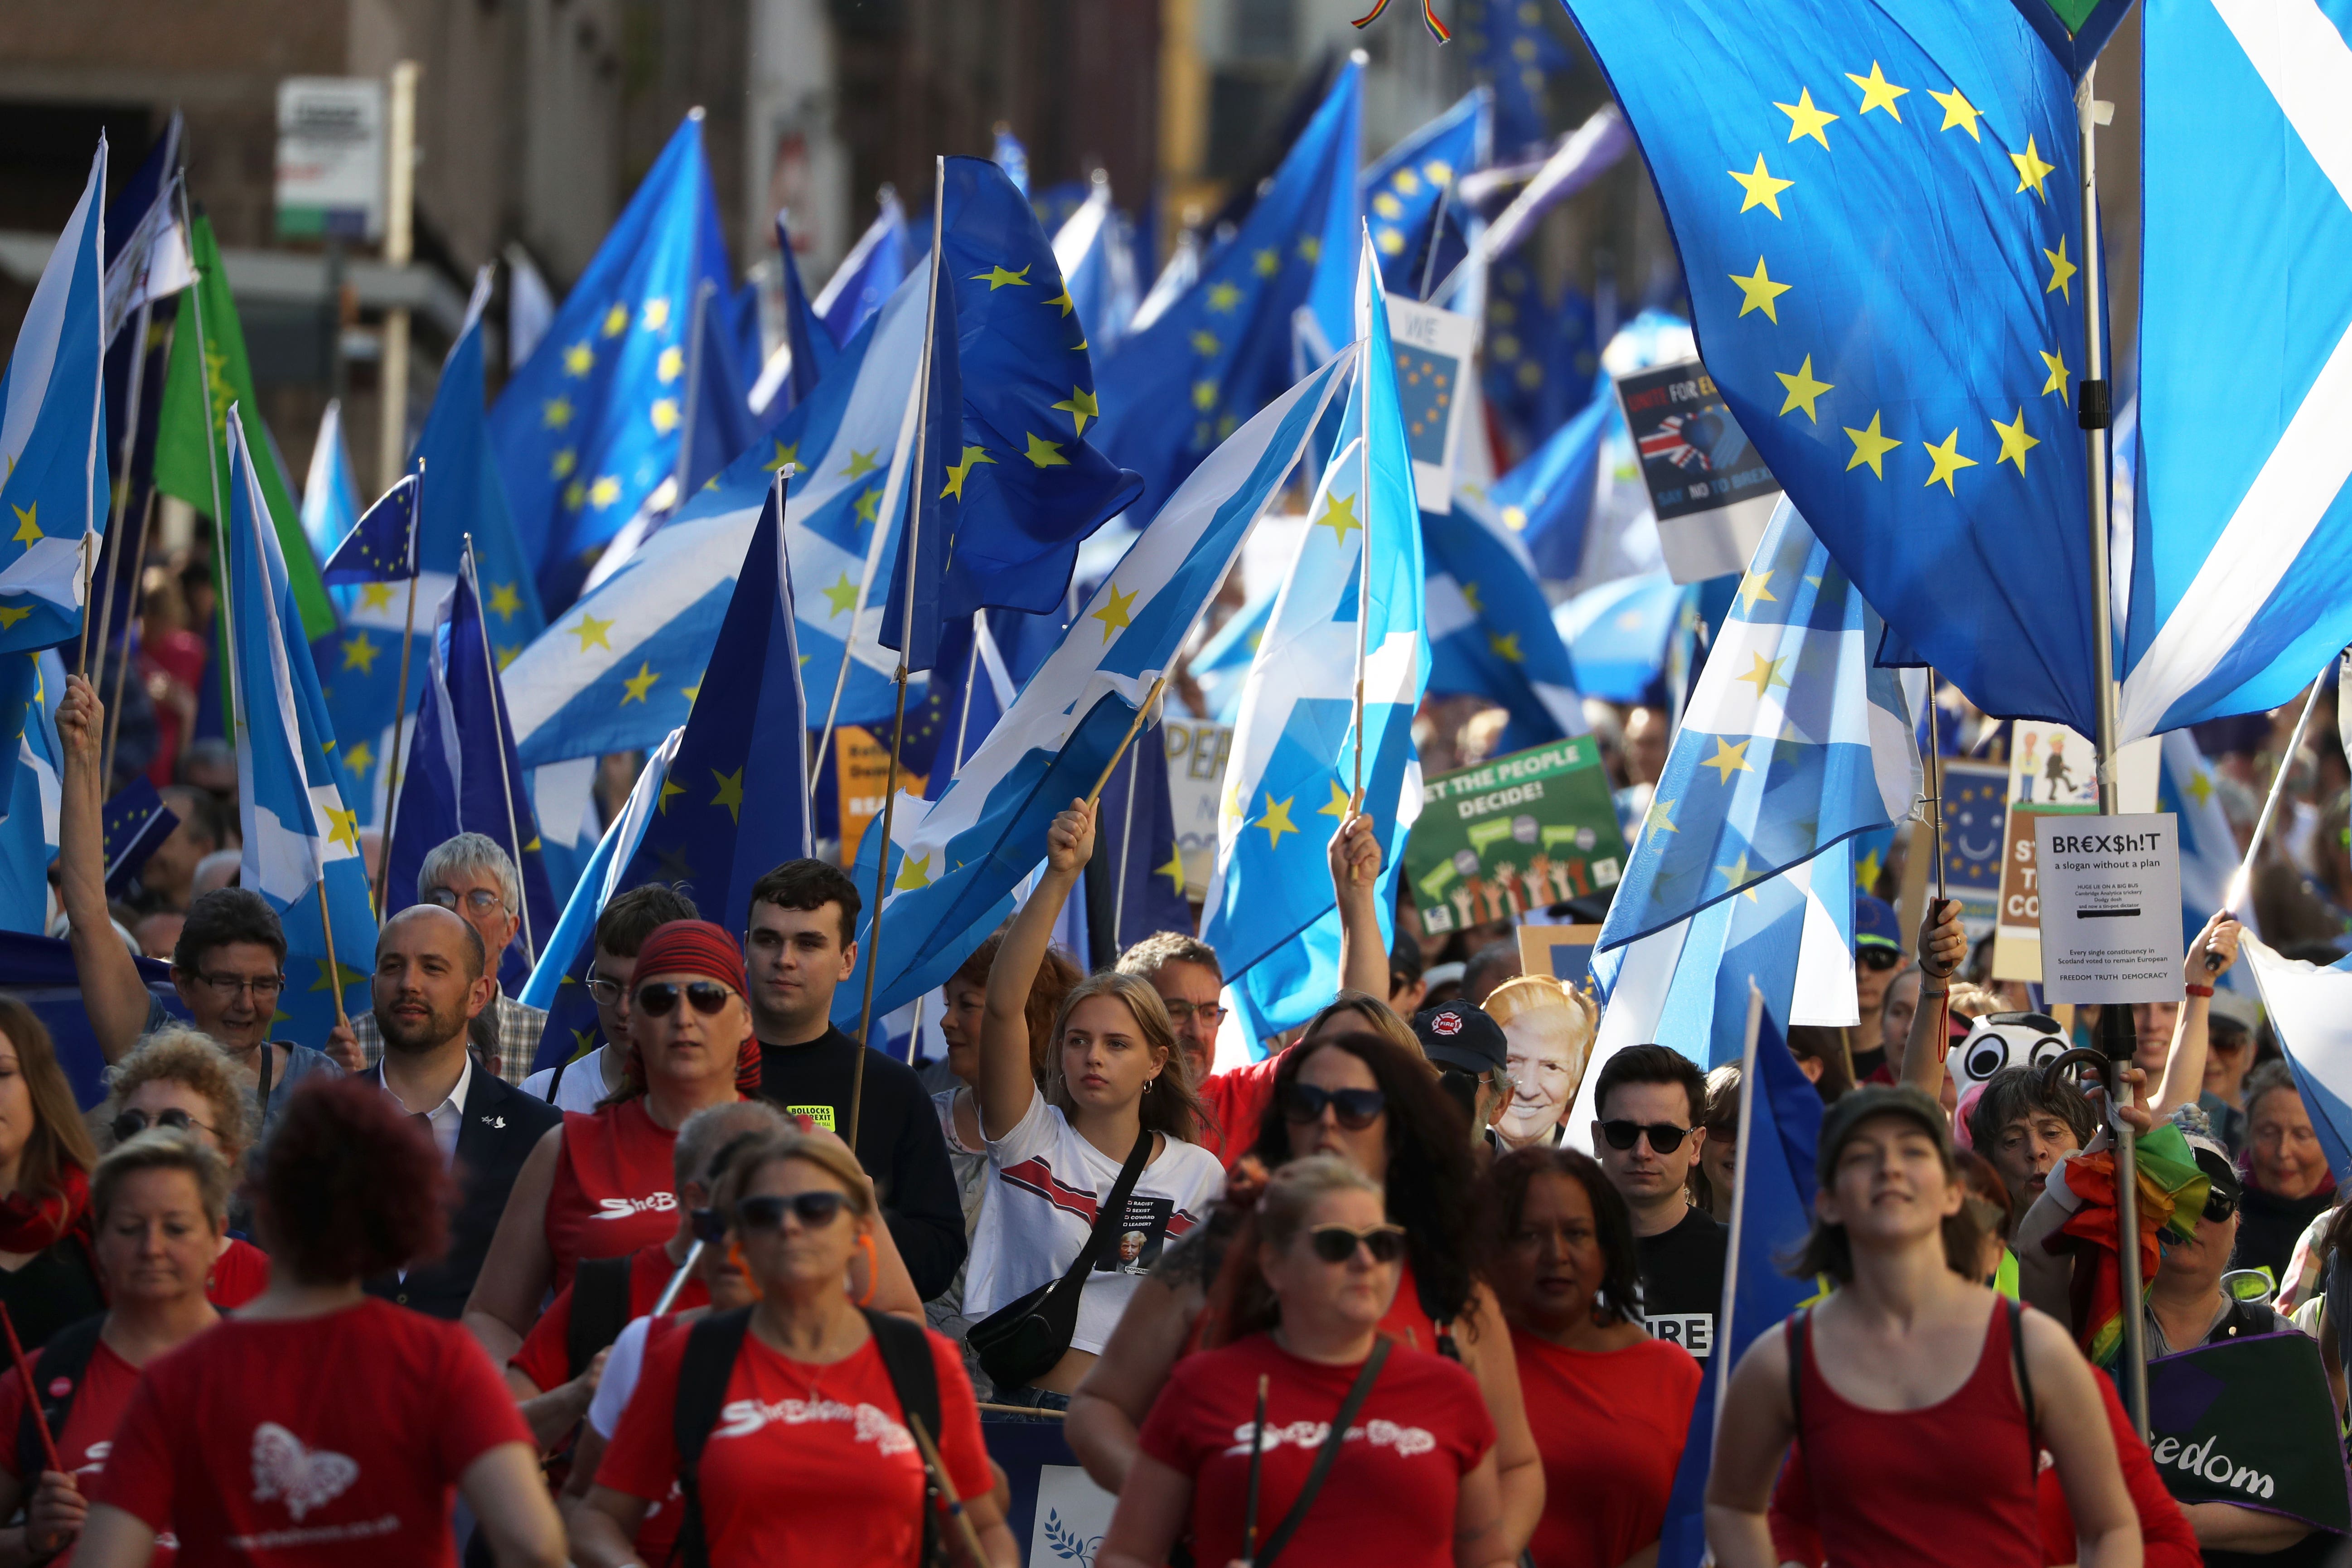 Campaigners at a march calling for the UK to remain in the EU (Andrew Milligan/PA)